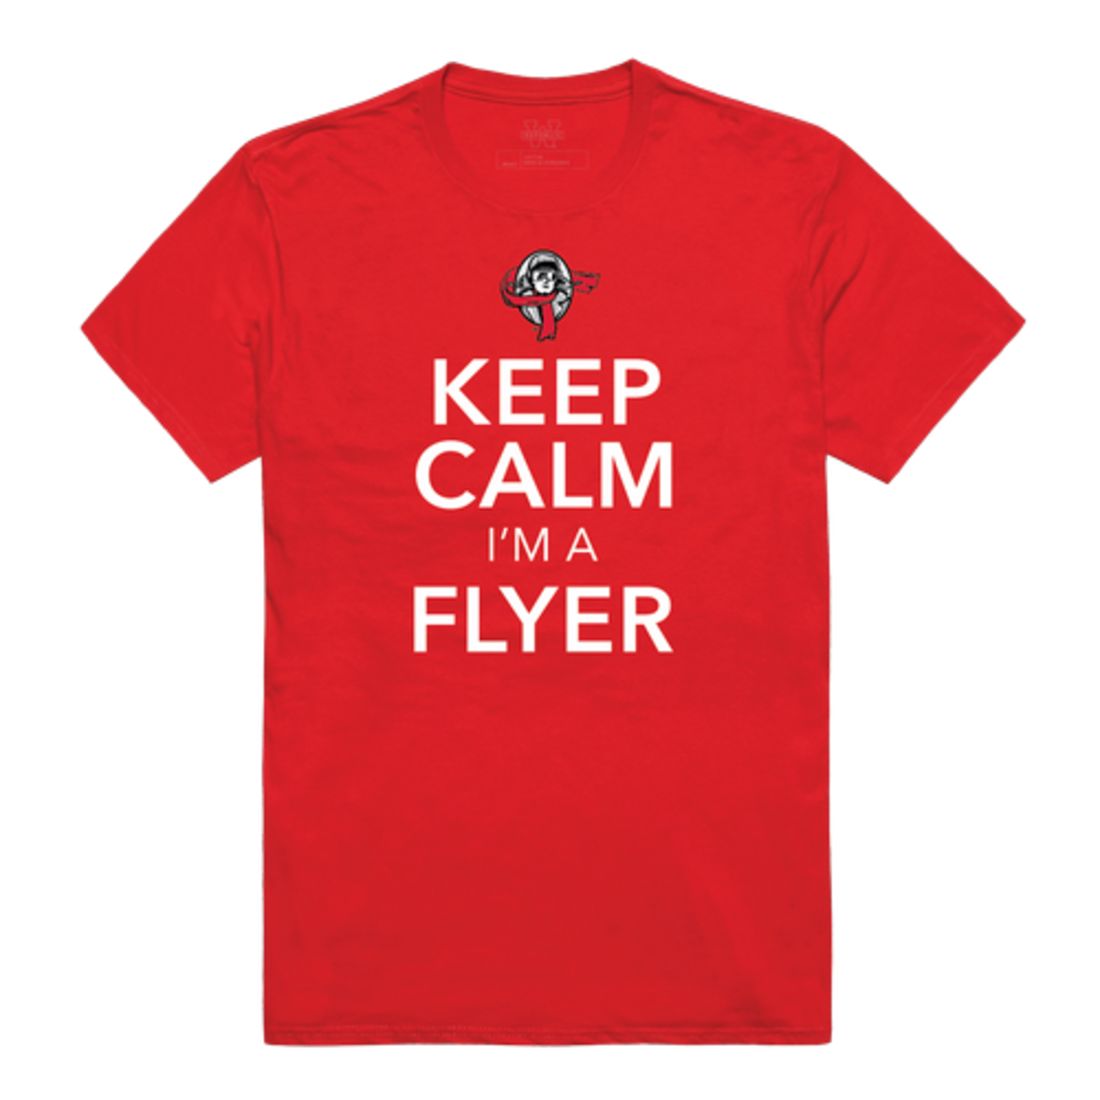 Keep Calm I'm From Lewis University Flyers T-Shirt Tee